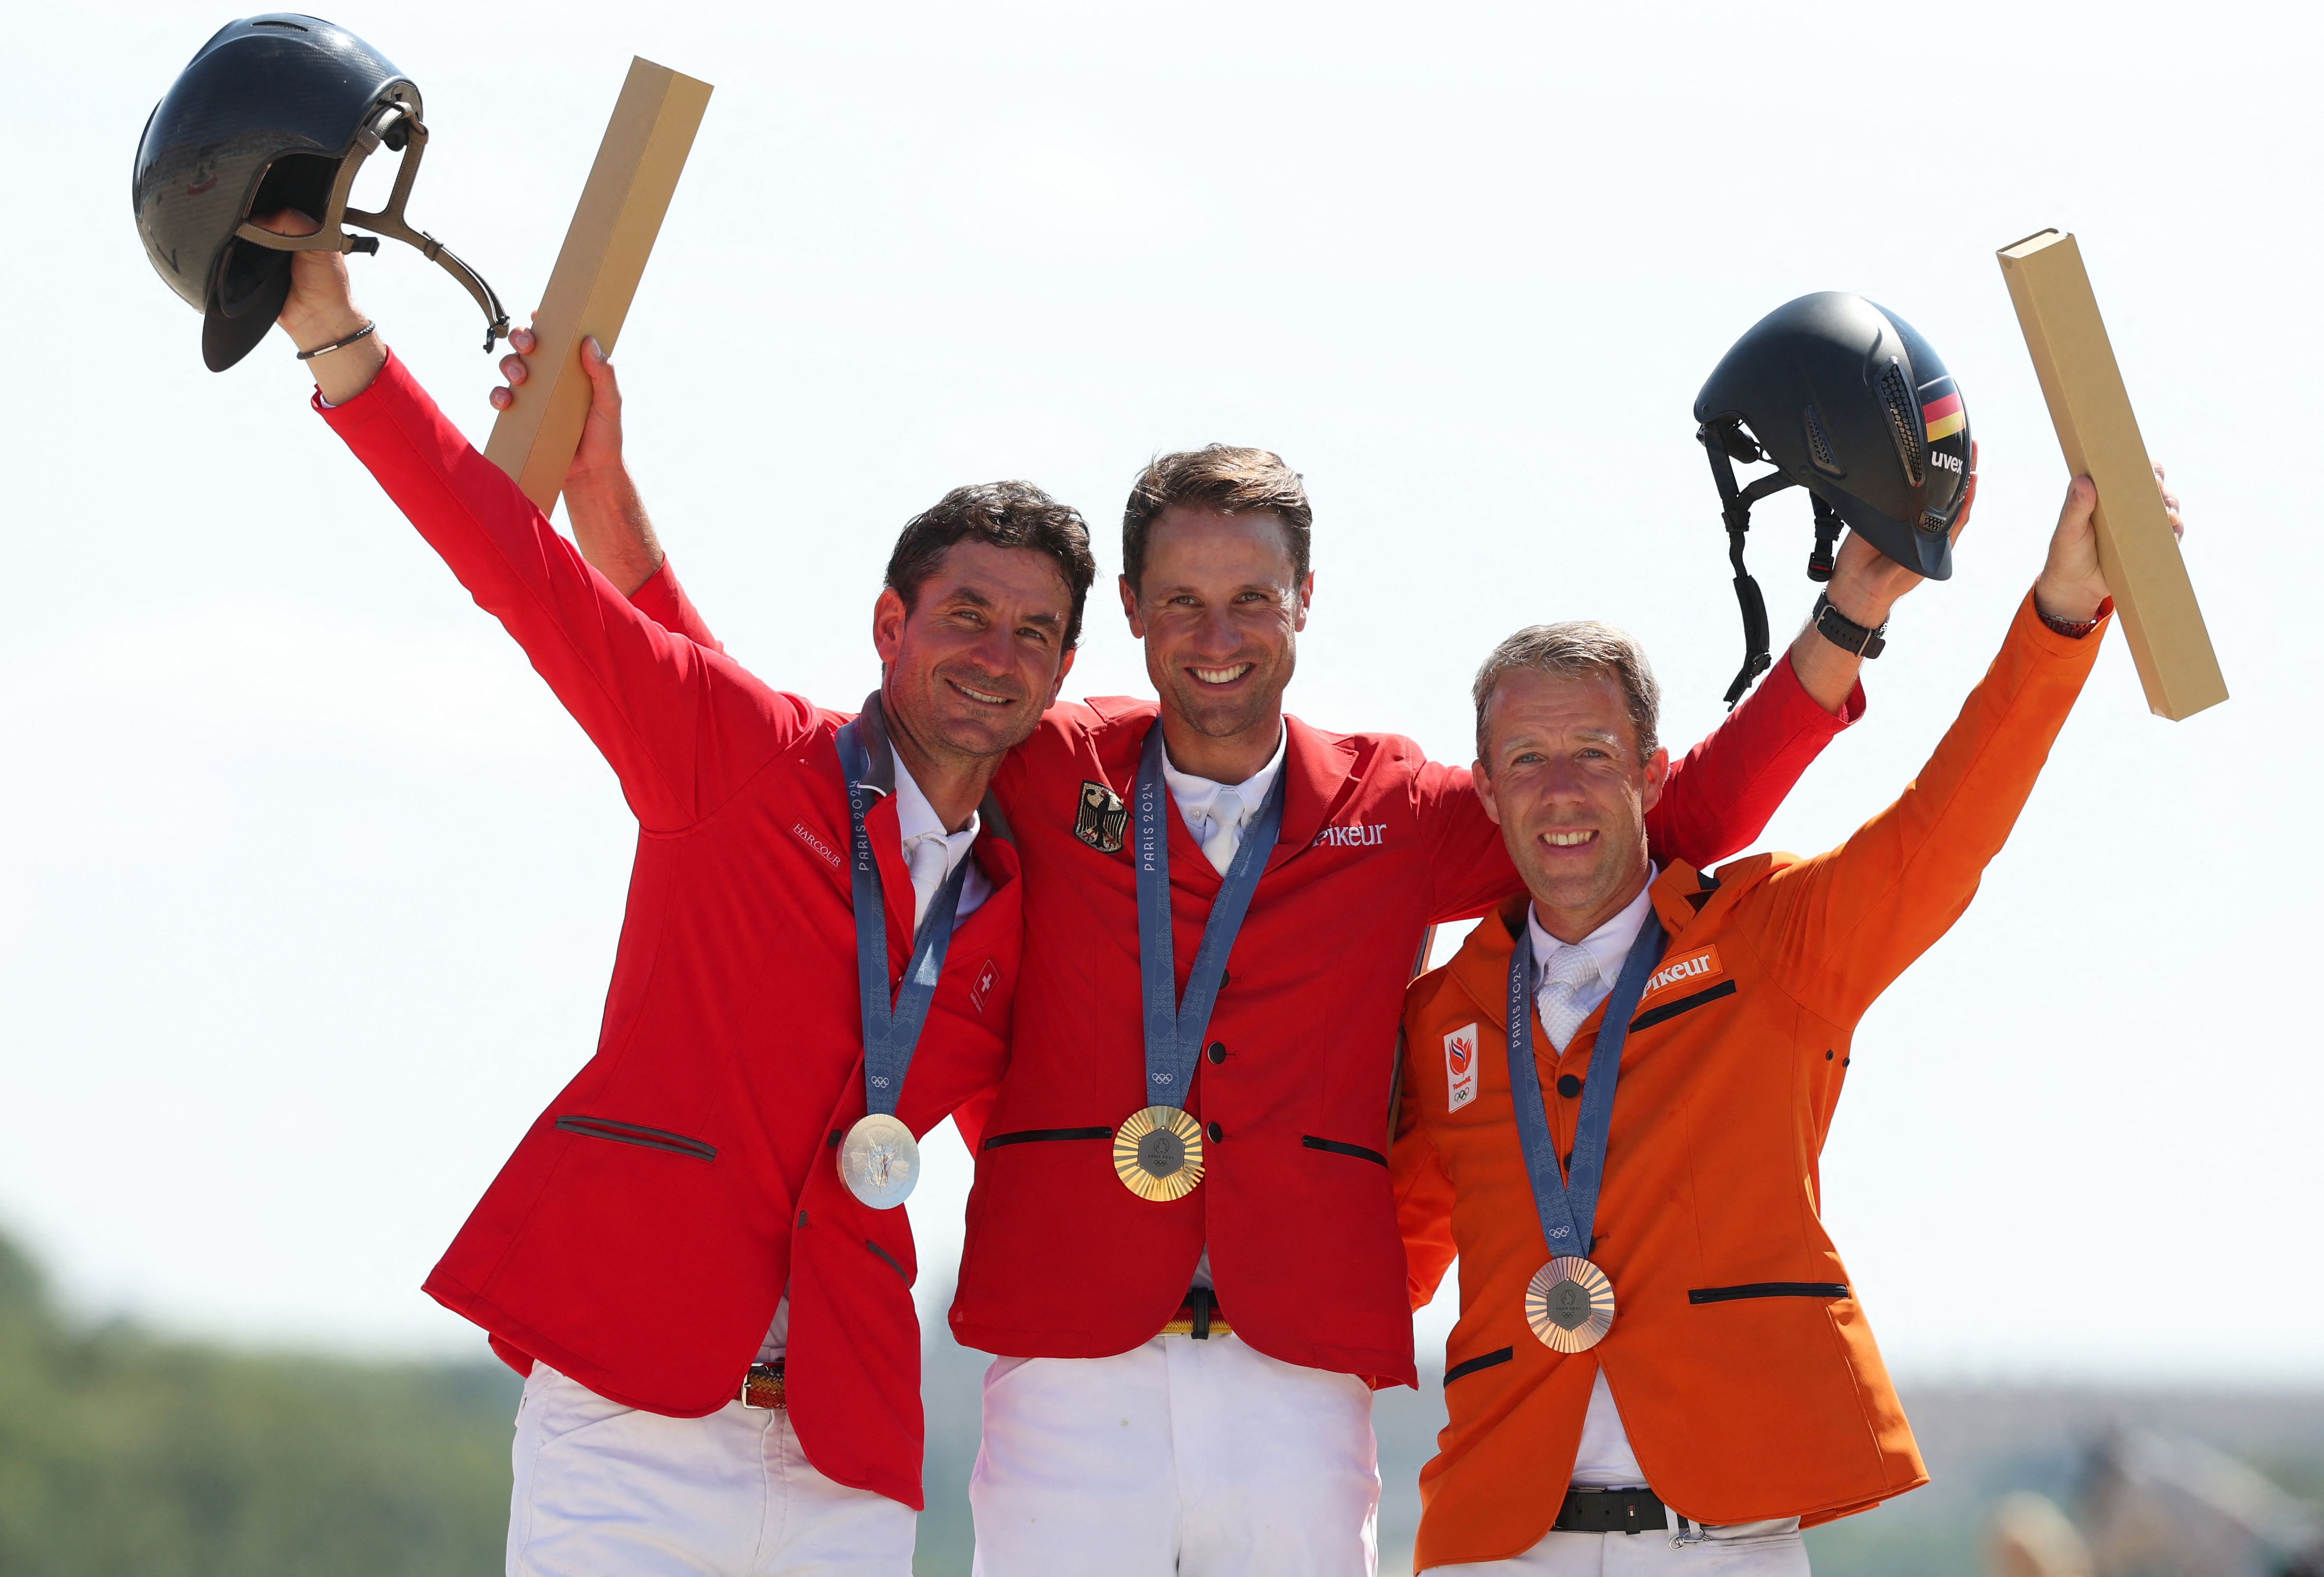 Silver medallist Switzerland's Steve Guerdat (L), gold medallist Germany's Christian Kukuk (C) and bronze medallist Netherlands' Maikel Van Der Vleuten (R) celebrate on the podium during the victory ceremony after the equestrian's jumping individual final during the Paris 2024 Olympic Games at the Chateau de Versailles, in Versailles, in the western outskirts of Paris, on August 6, 2024. (Photo by Pierre-Philippe MARCOU / AFP)